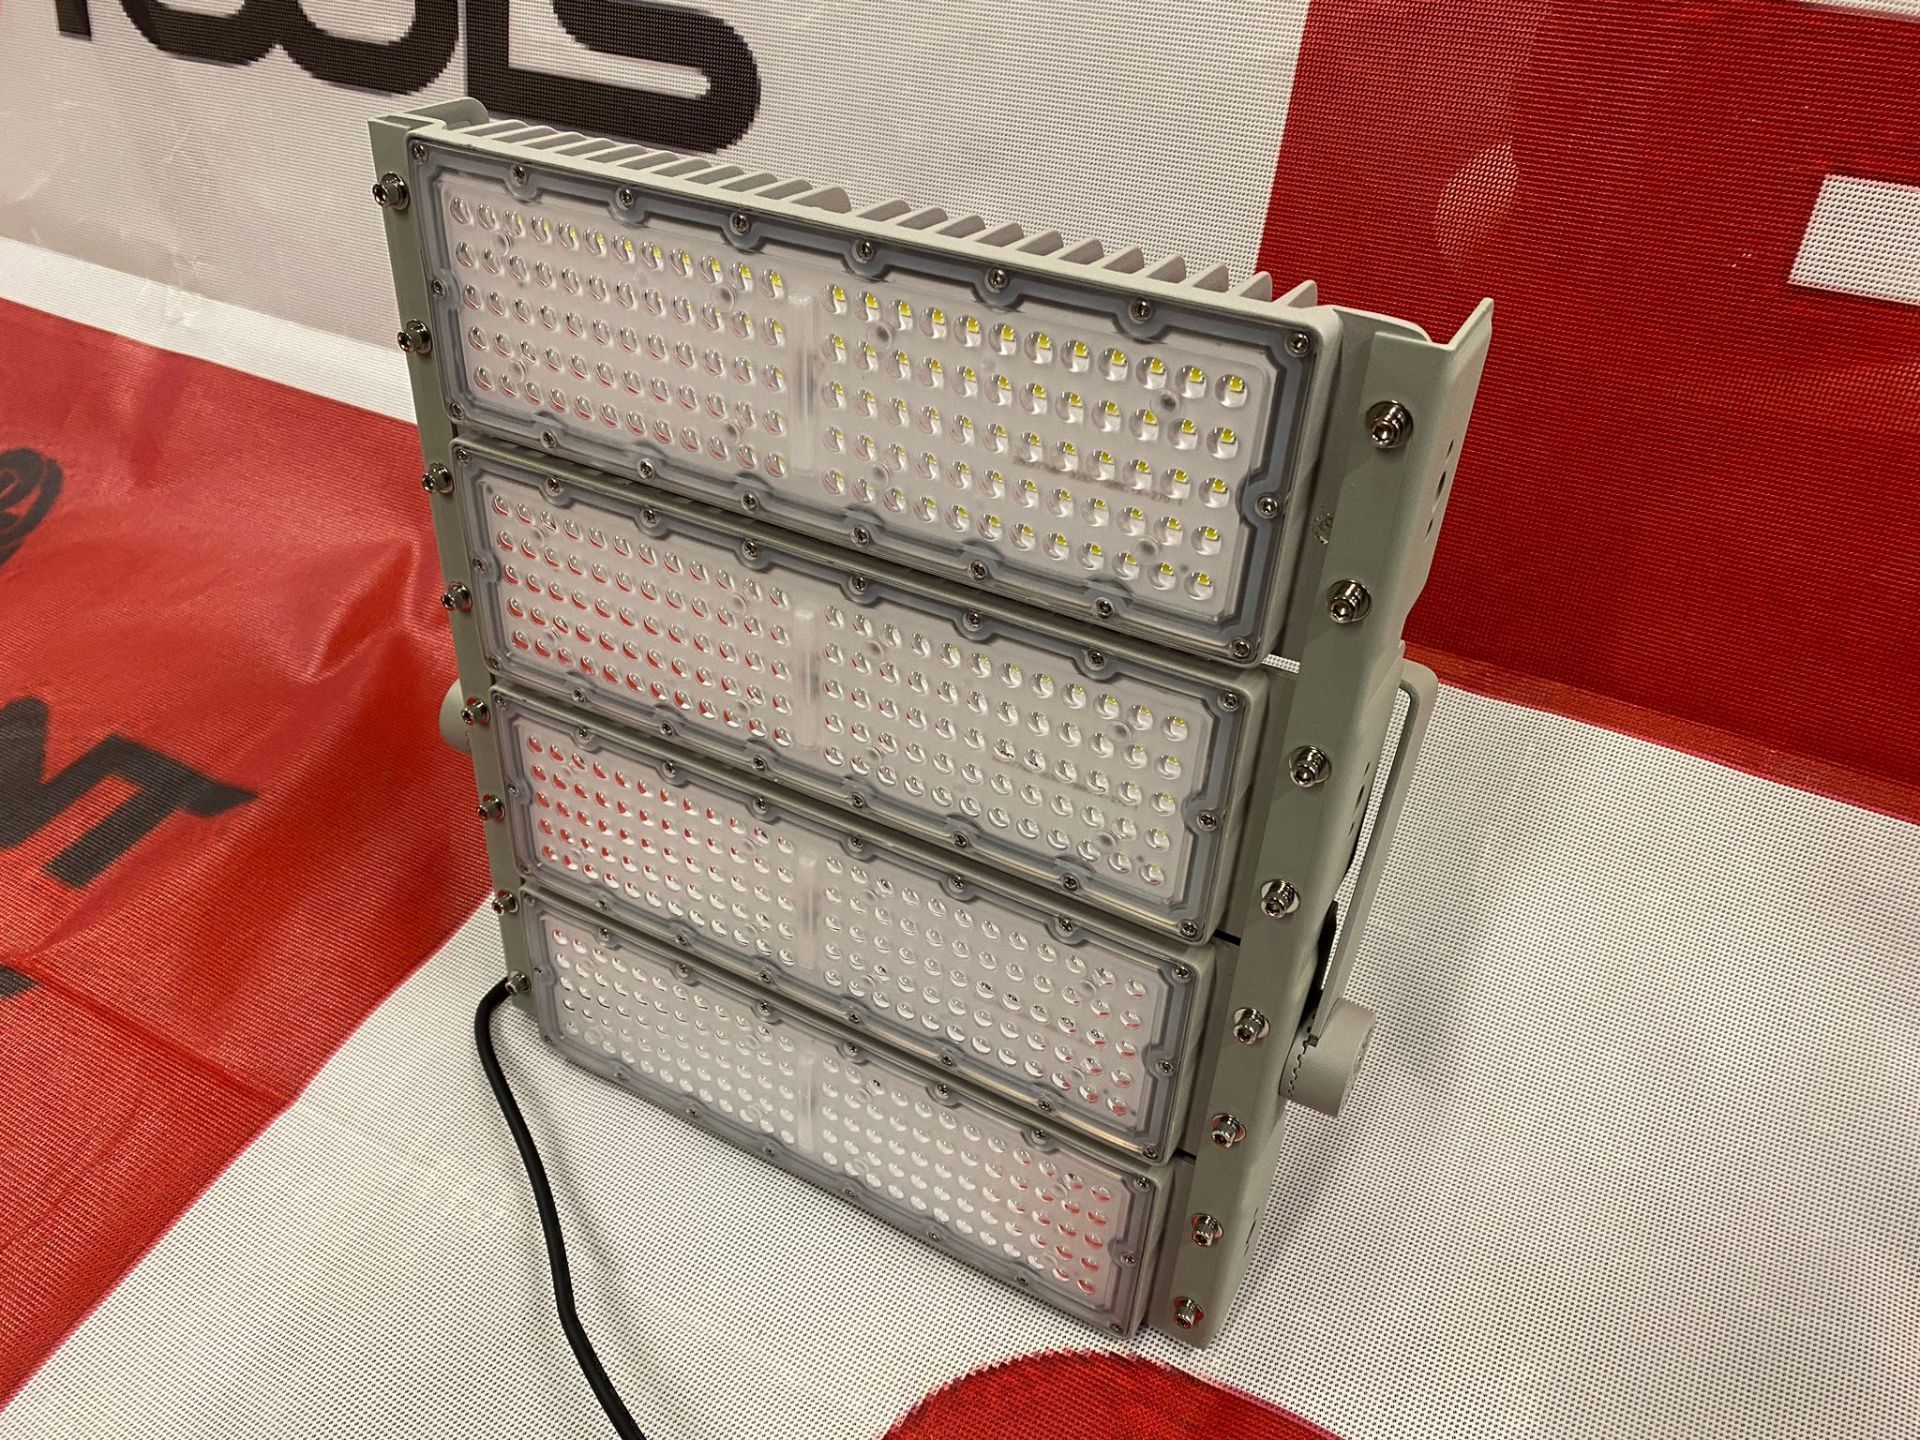 3 x LED400 Watt Flood Light Panel - For Car Parks, Security, Playing fields, Football pitches etc - Image 7 of 8